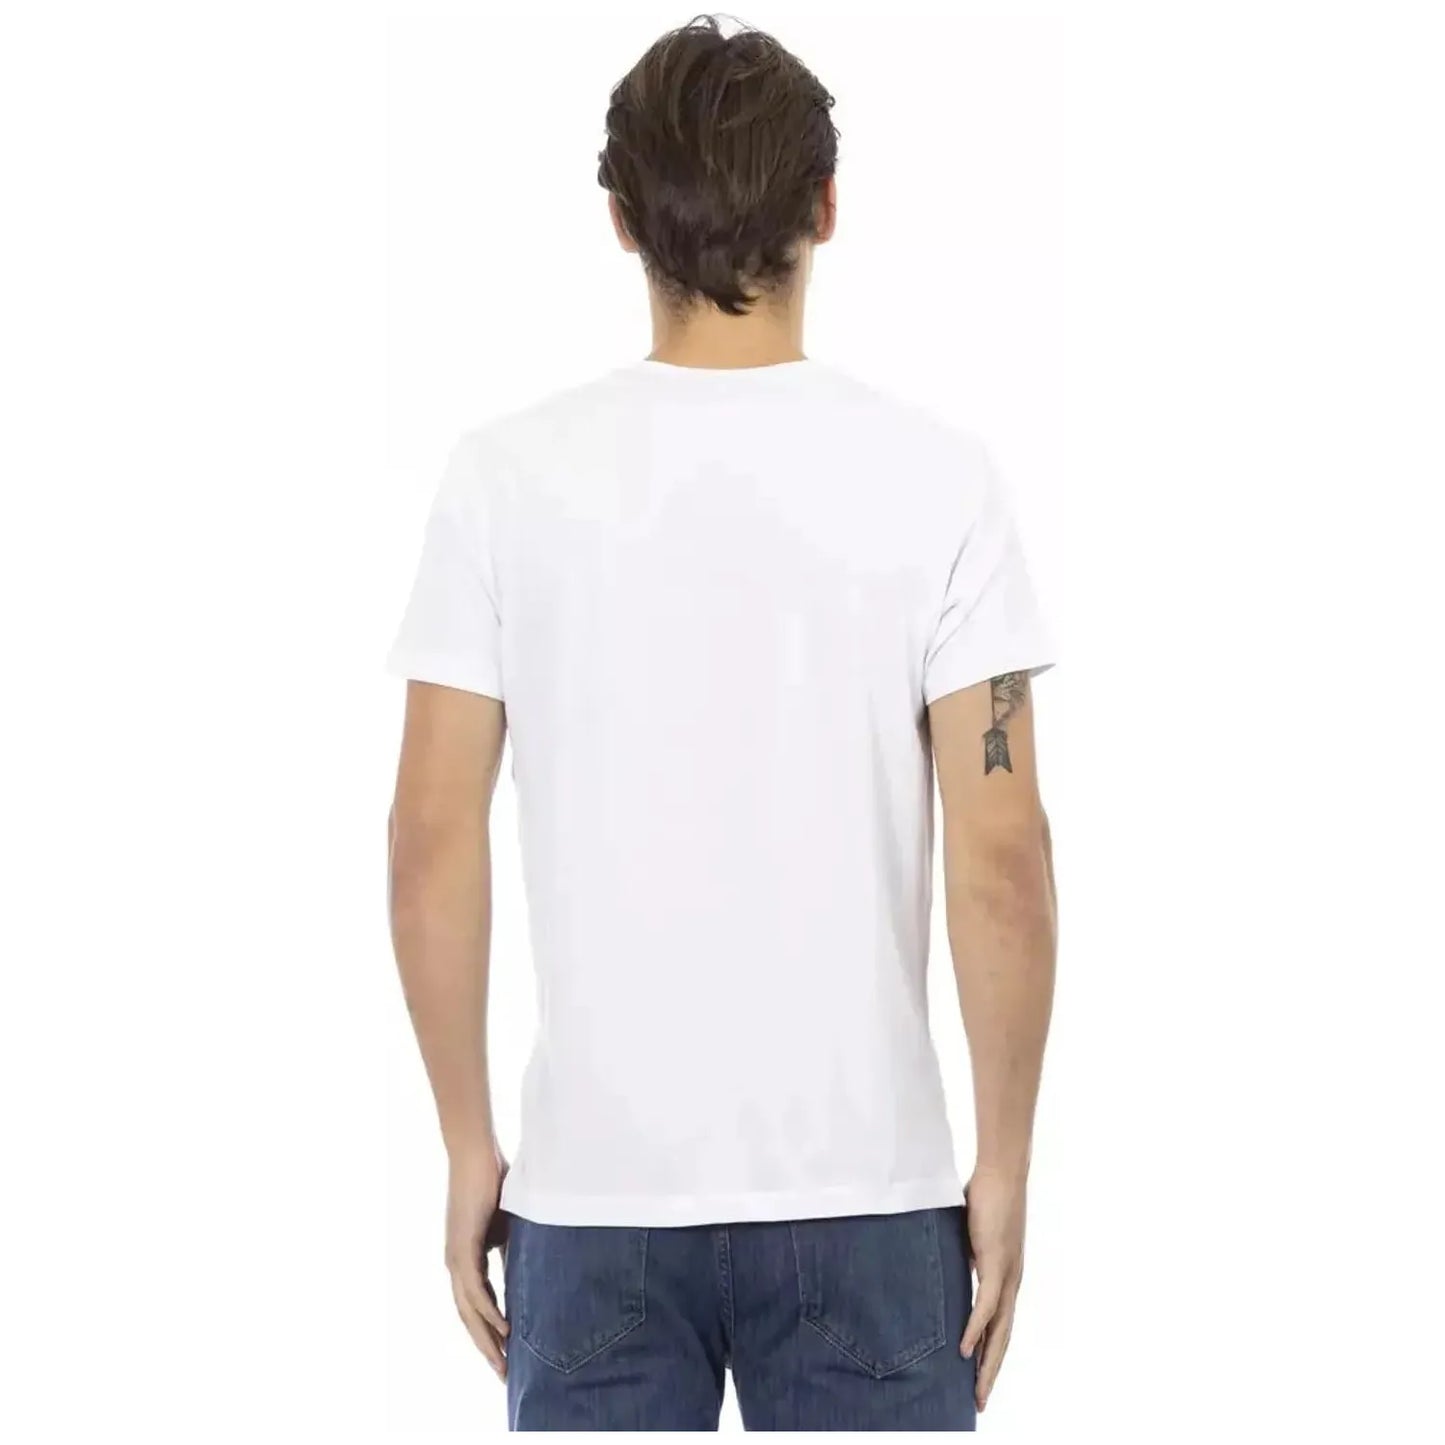 Trussardi Action Elegant V-Neck Tee with Chic Front Print white-cotton-t-shirt-76